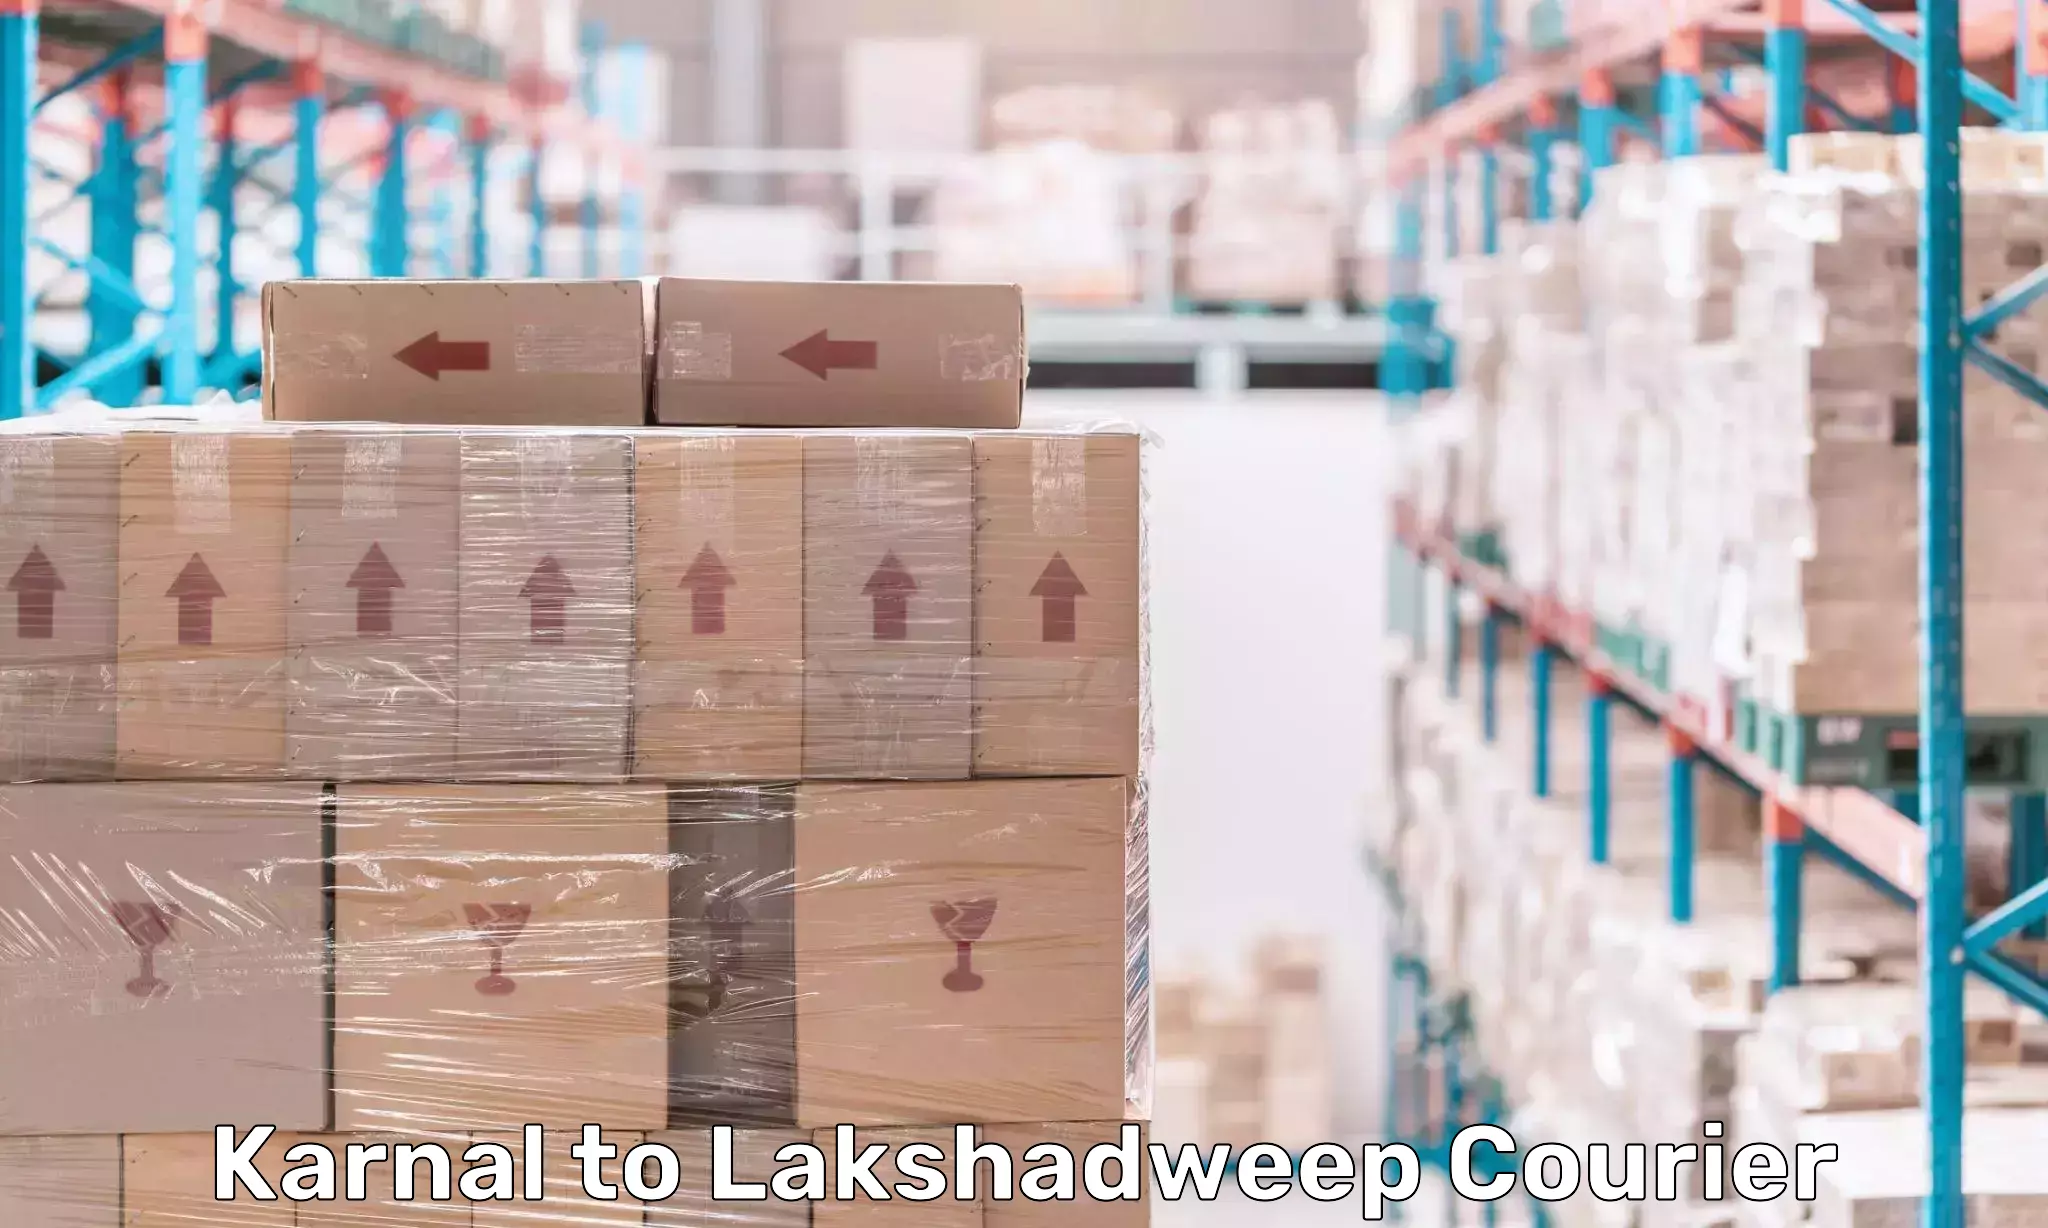 Cost-effective freight solutions Karnal to Lakshadweep